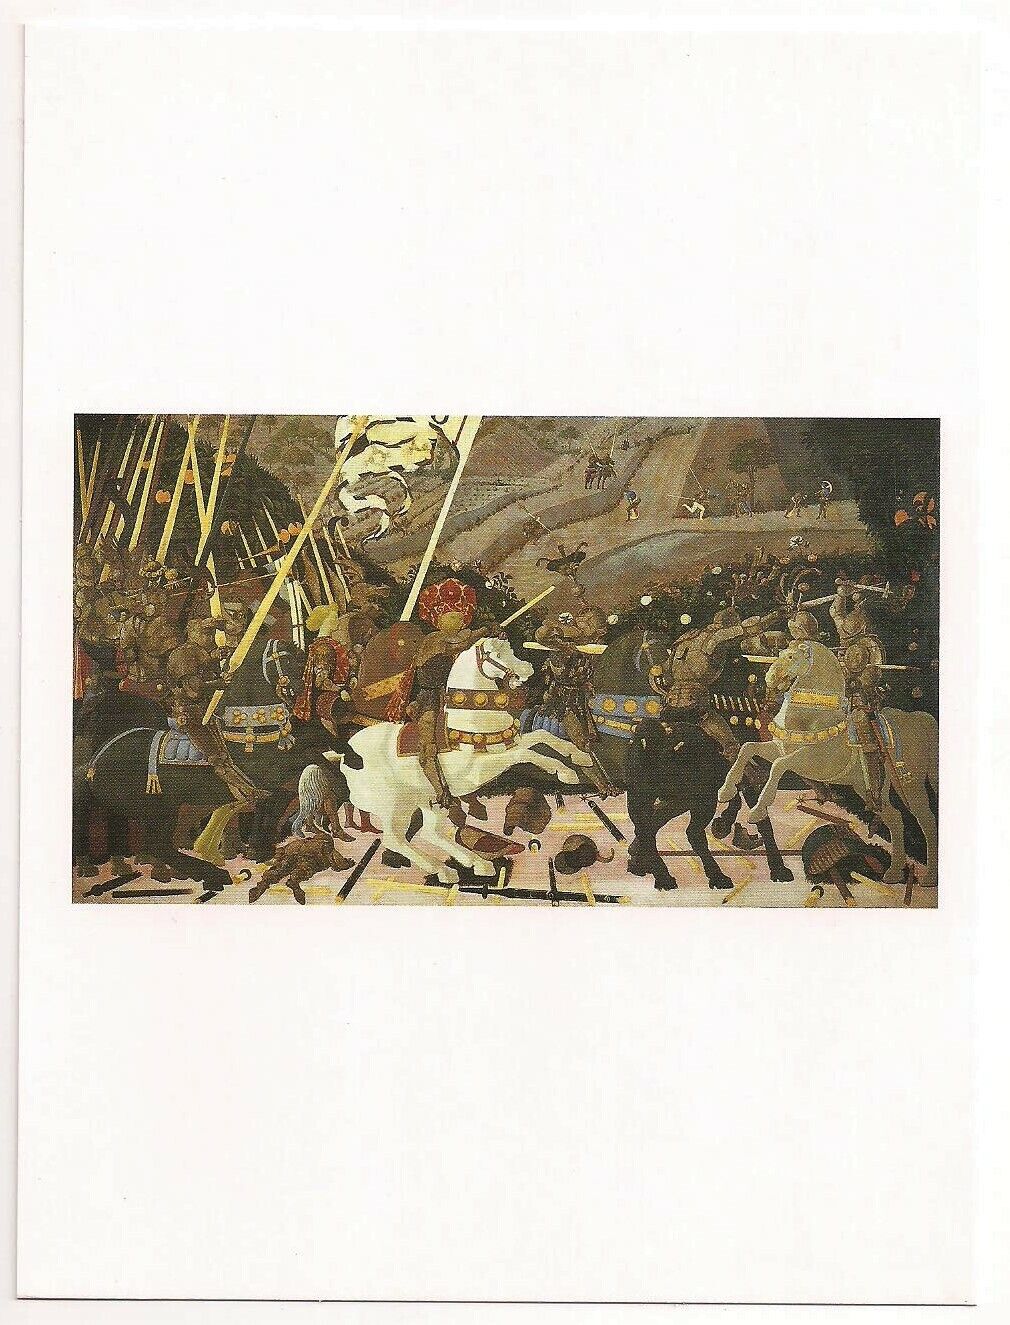 THE BATTLE OF SAN ROMANO Art Postcard PAOLO UCCELLO National Gallery LONDON UK